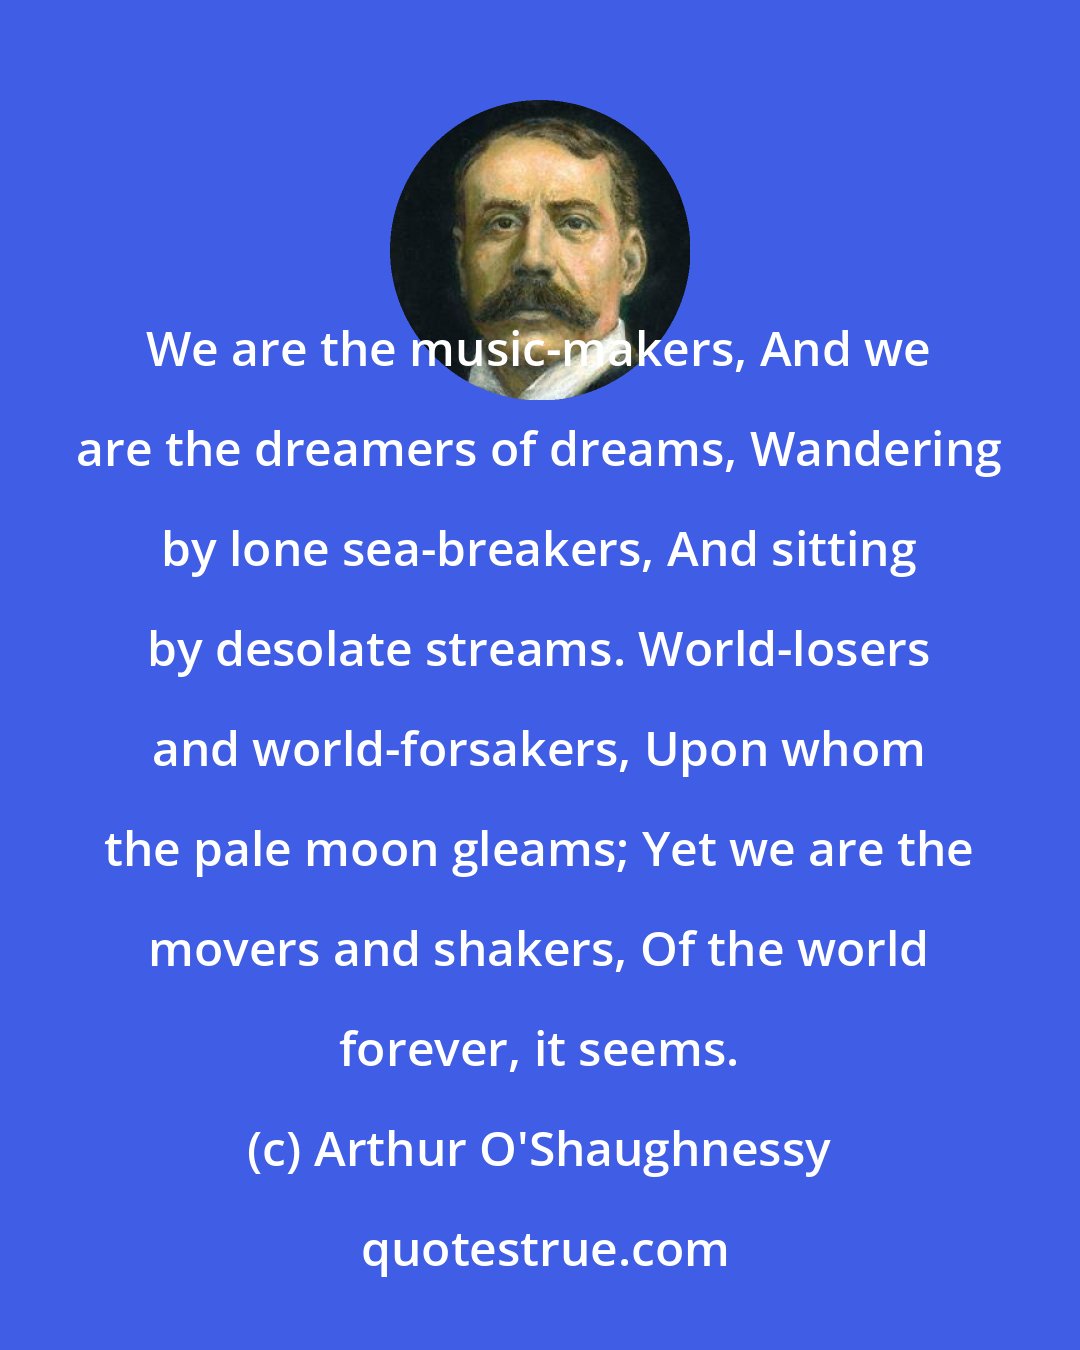 Arthur O'Shaughnessy: We are the music-makers, And we are the dreamers of dreams, Wandering by lone sea-breakers, And sitting by desolate streams. World-losers and world-forsakers, Upon whom the pale moon gleams; Yet we are the movers and shakers, Of the world forever, it seems.